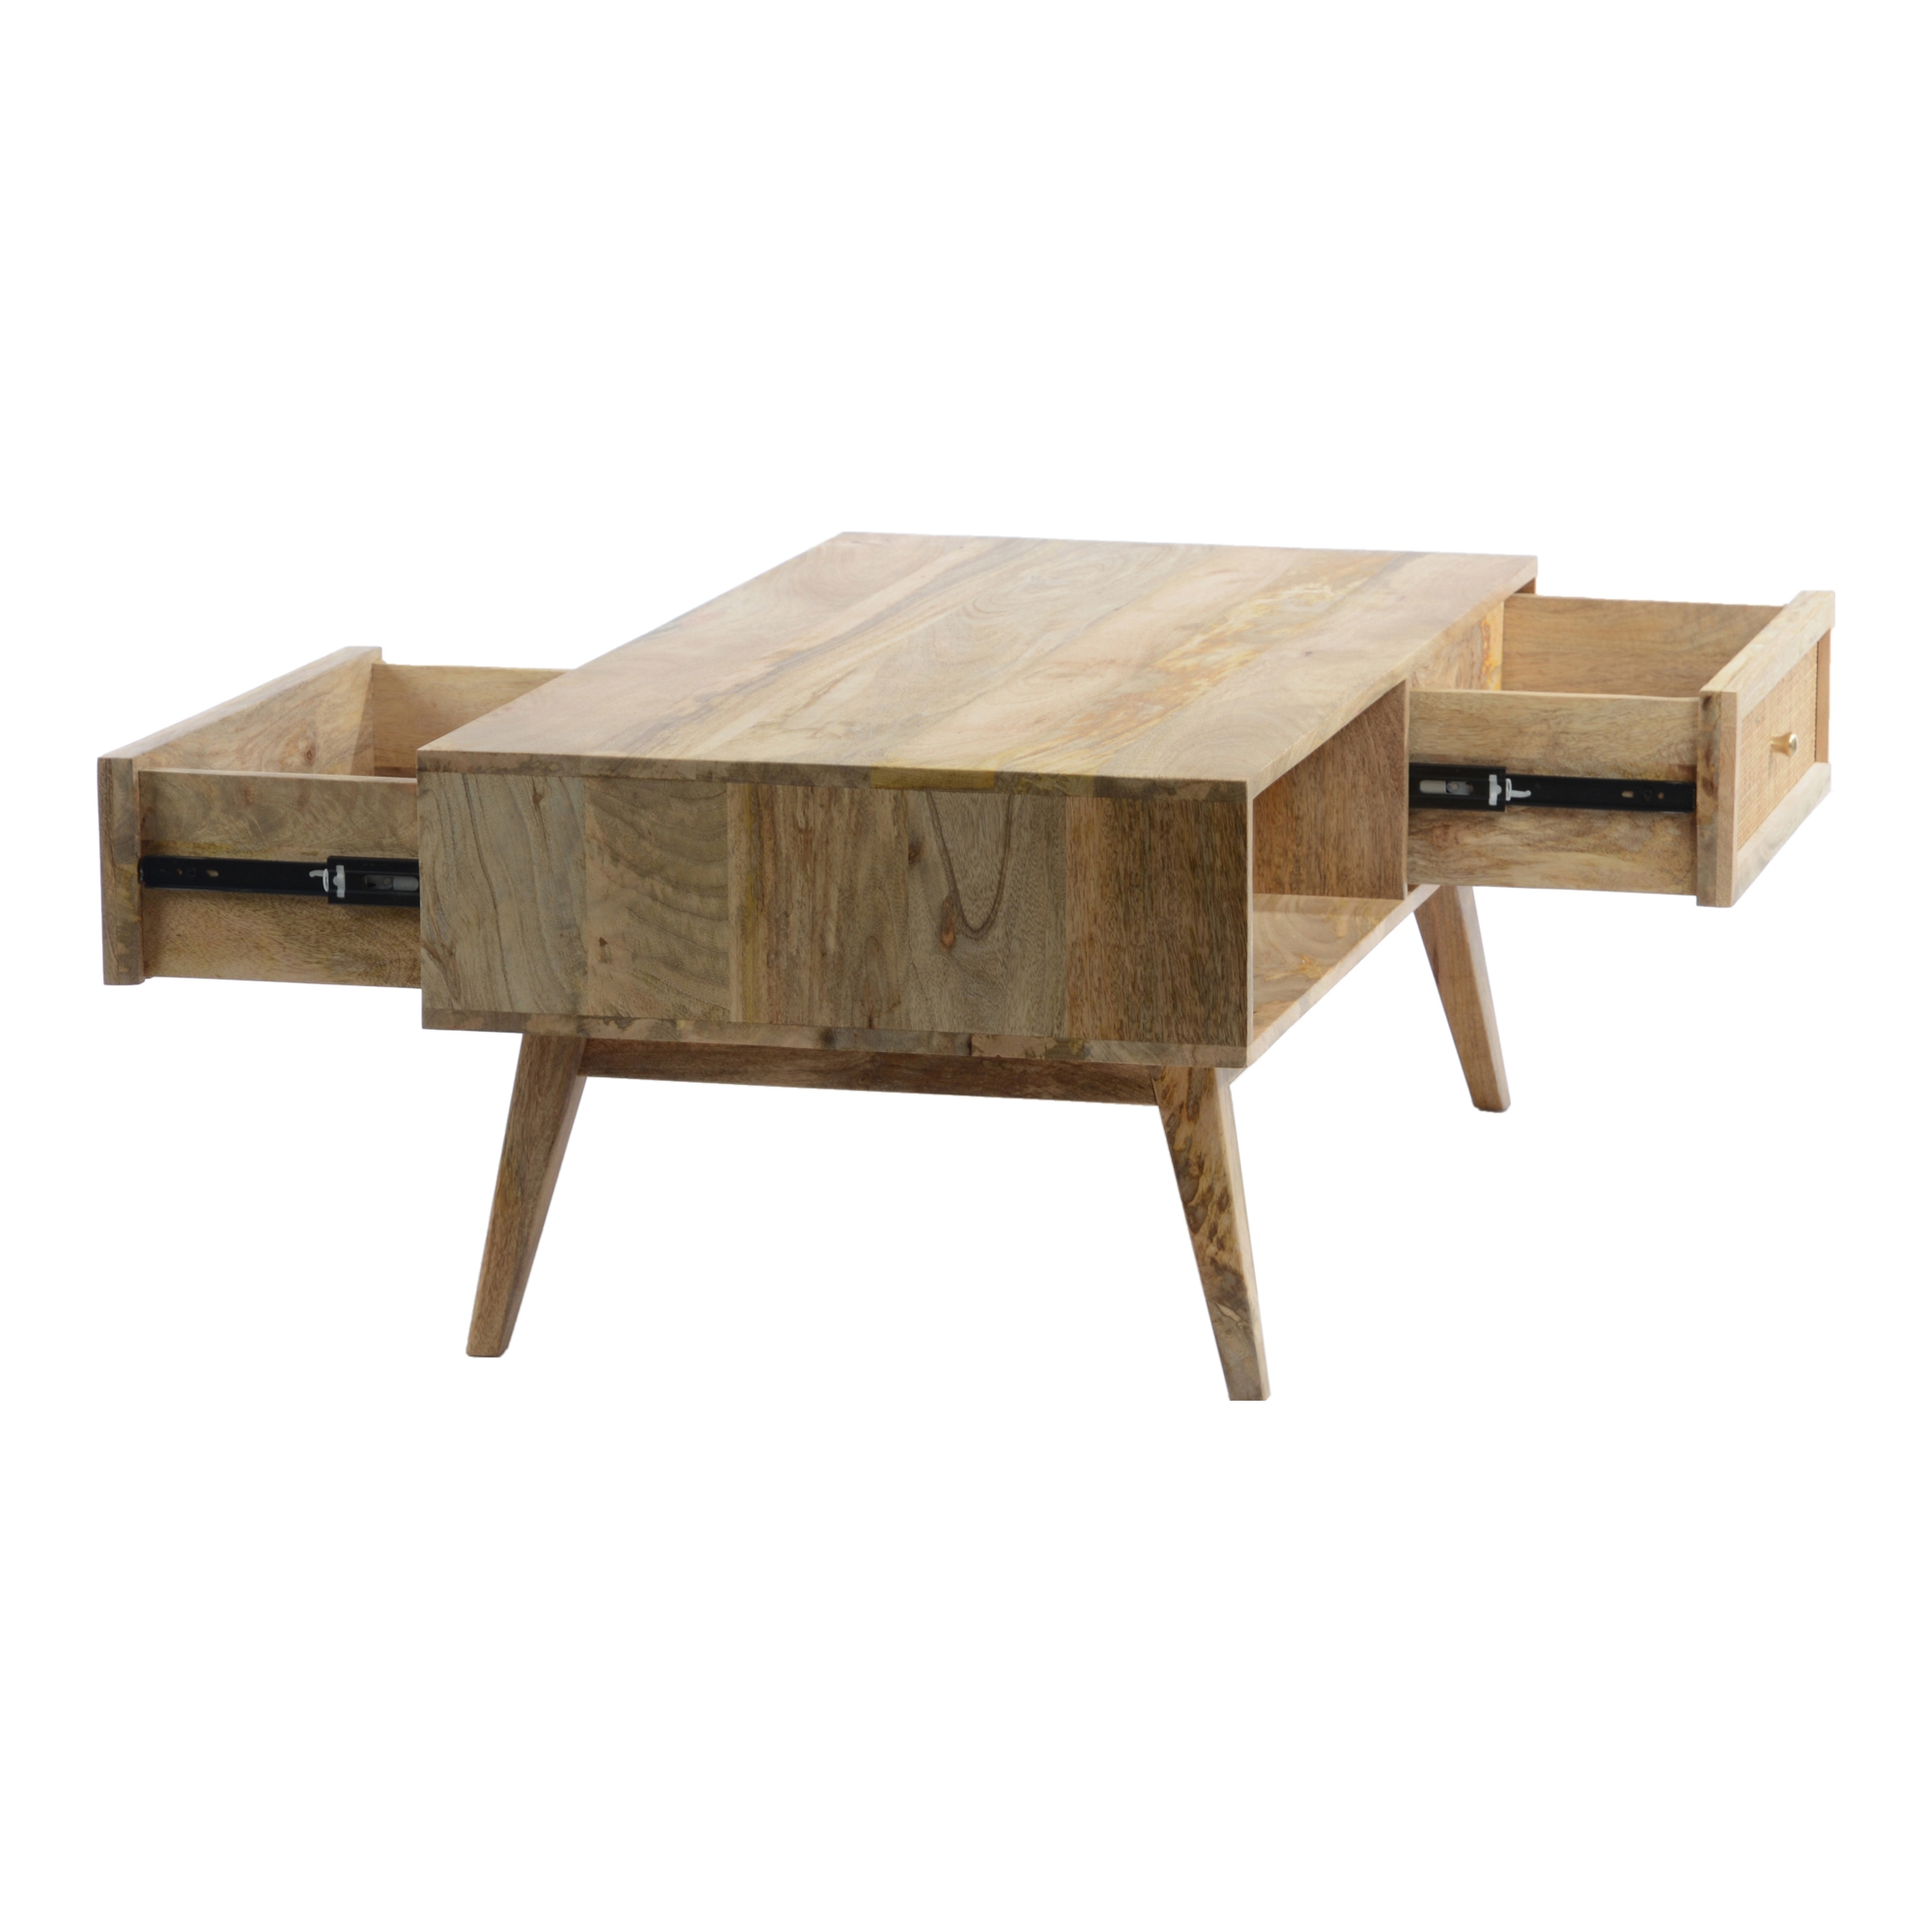 REED COFFEE TABLE - Image 4